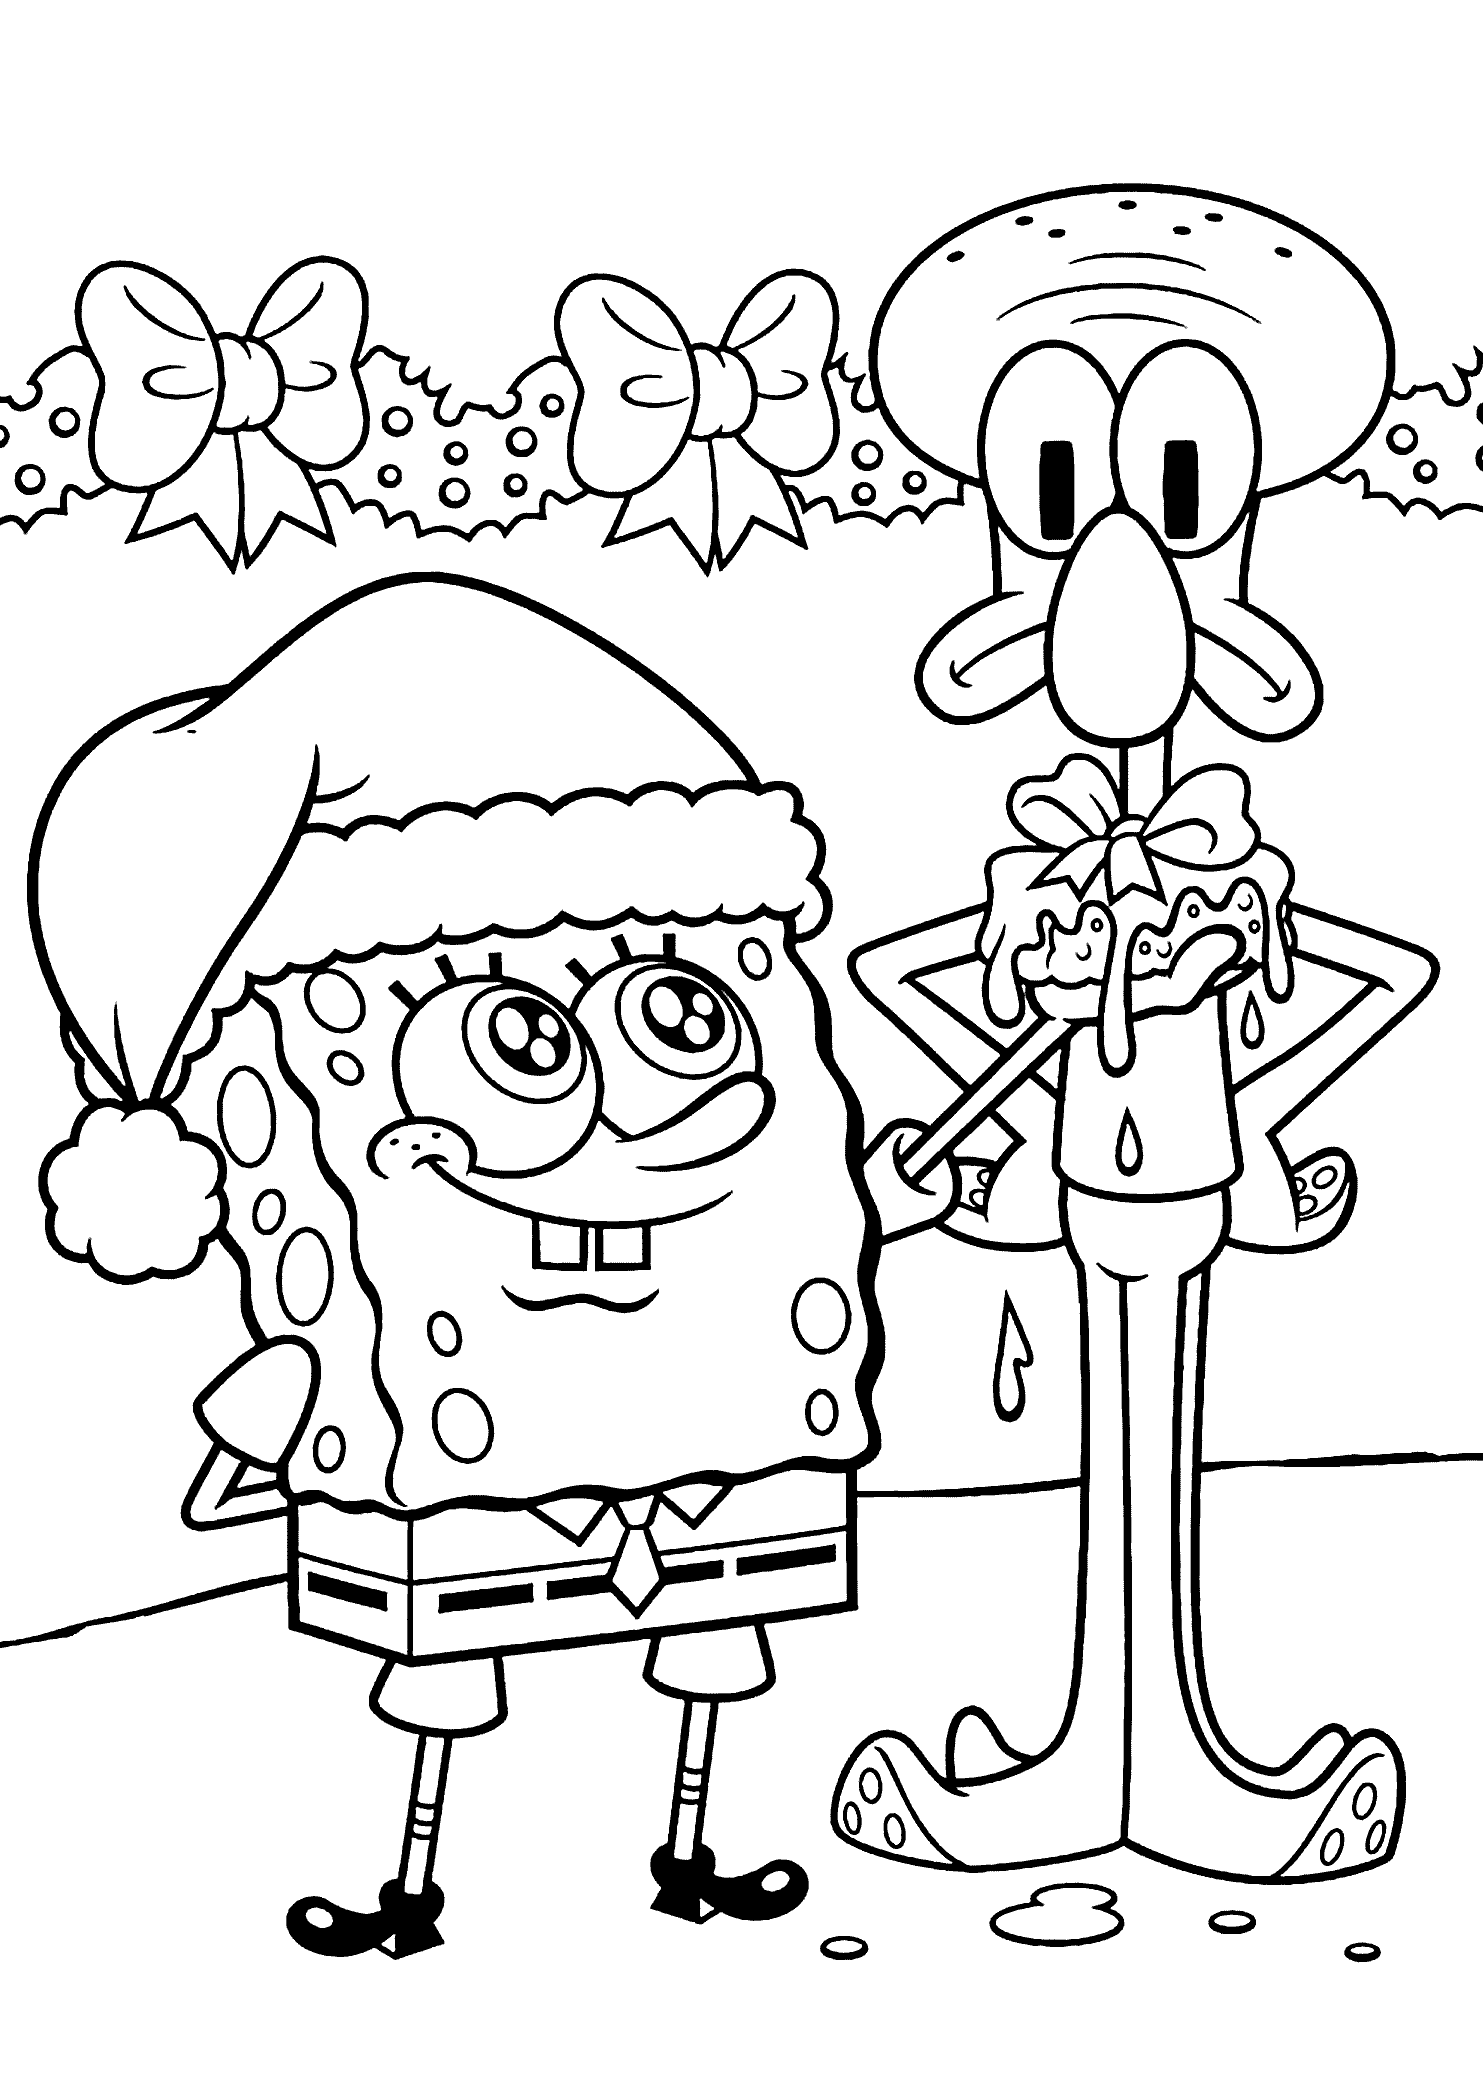 Spongebob and squidward coloring pages for kids printable free printable christmas coloring pages spongebob coloring christmas coloring books